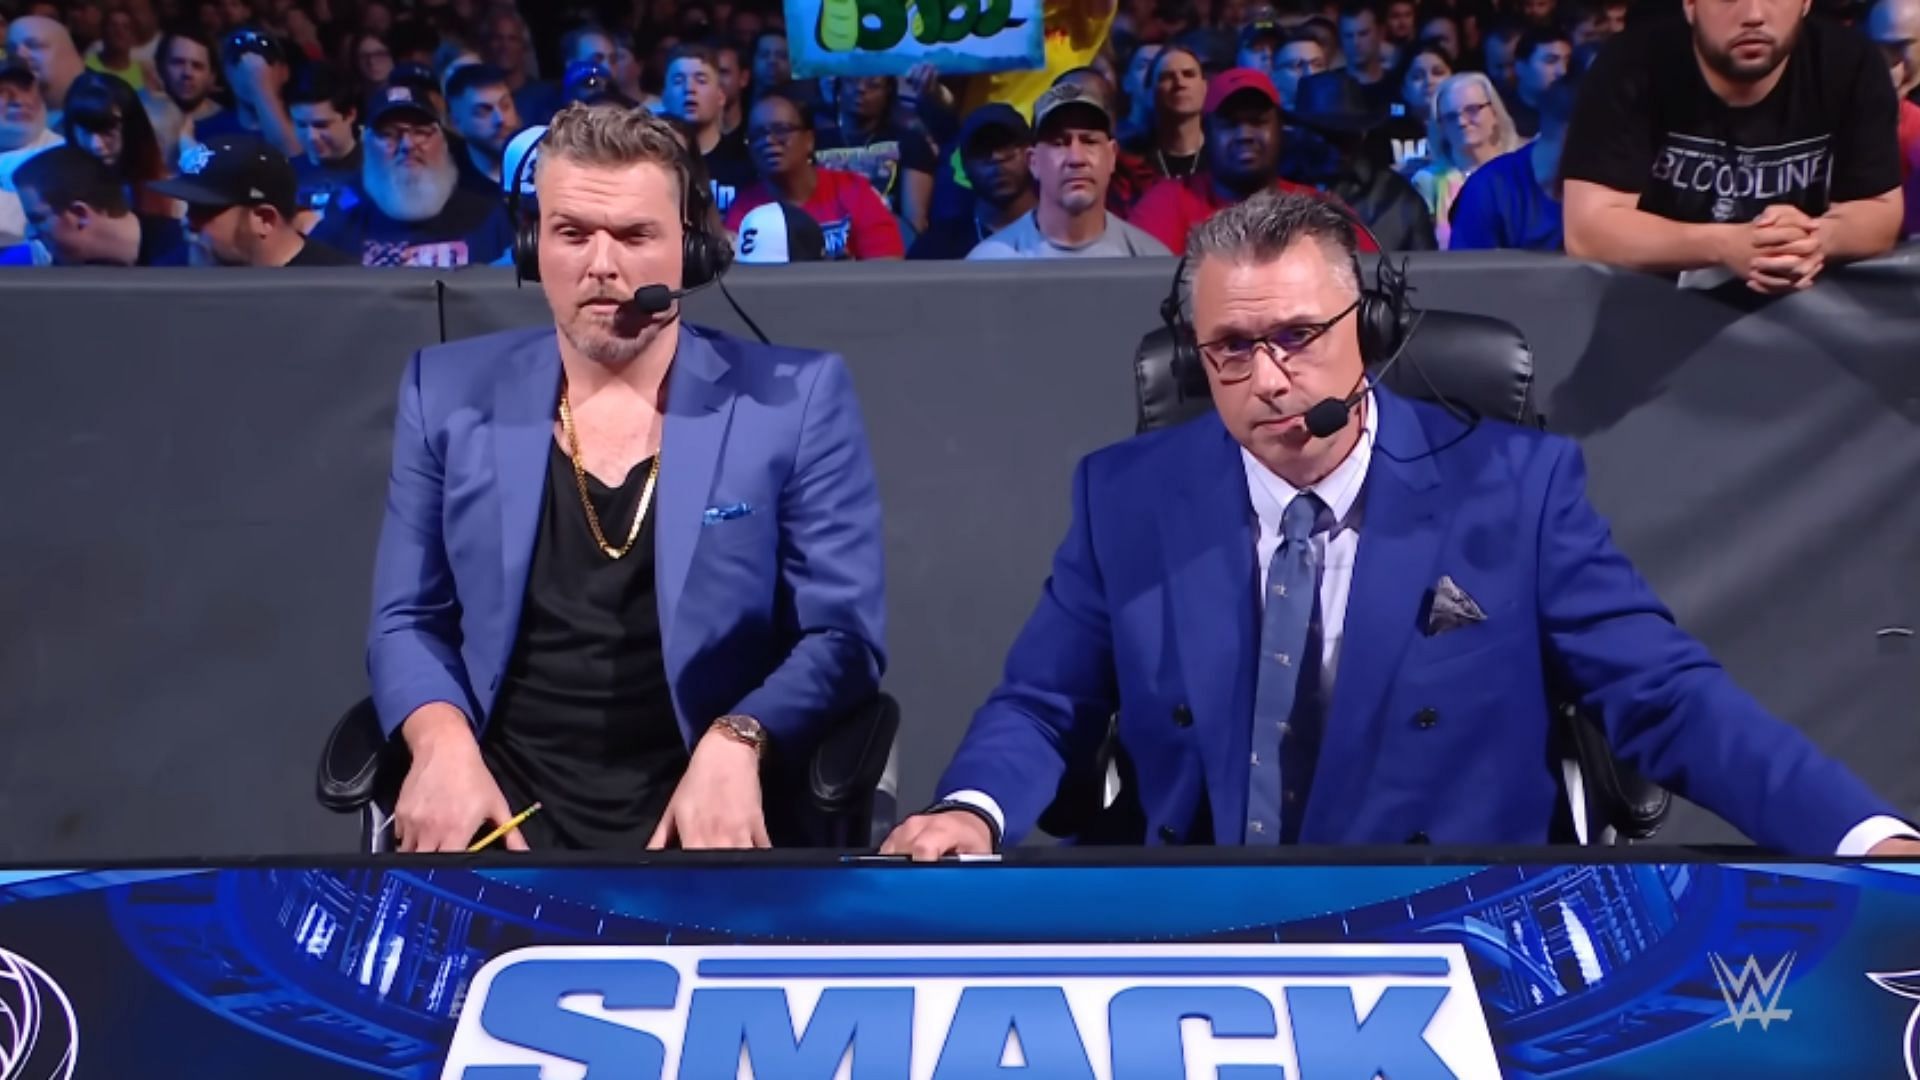 Pat McAfee (left) and Michael Cole (right)